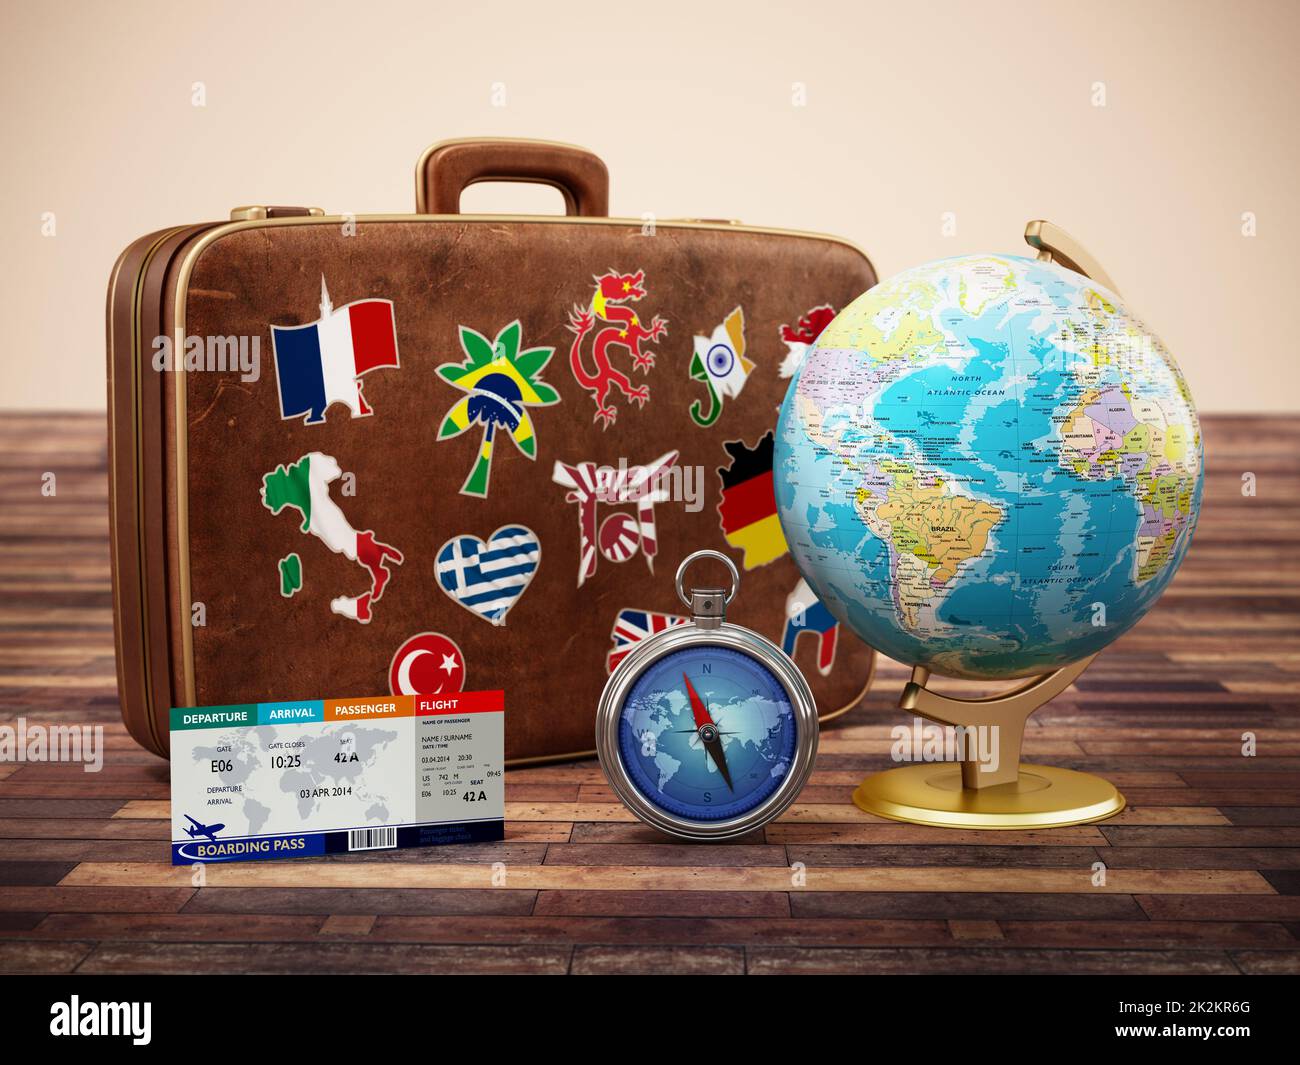 Vintage suitcase with flags of world countries, globe, compass and plane tickets. 3D illustration Stock Photo